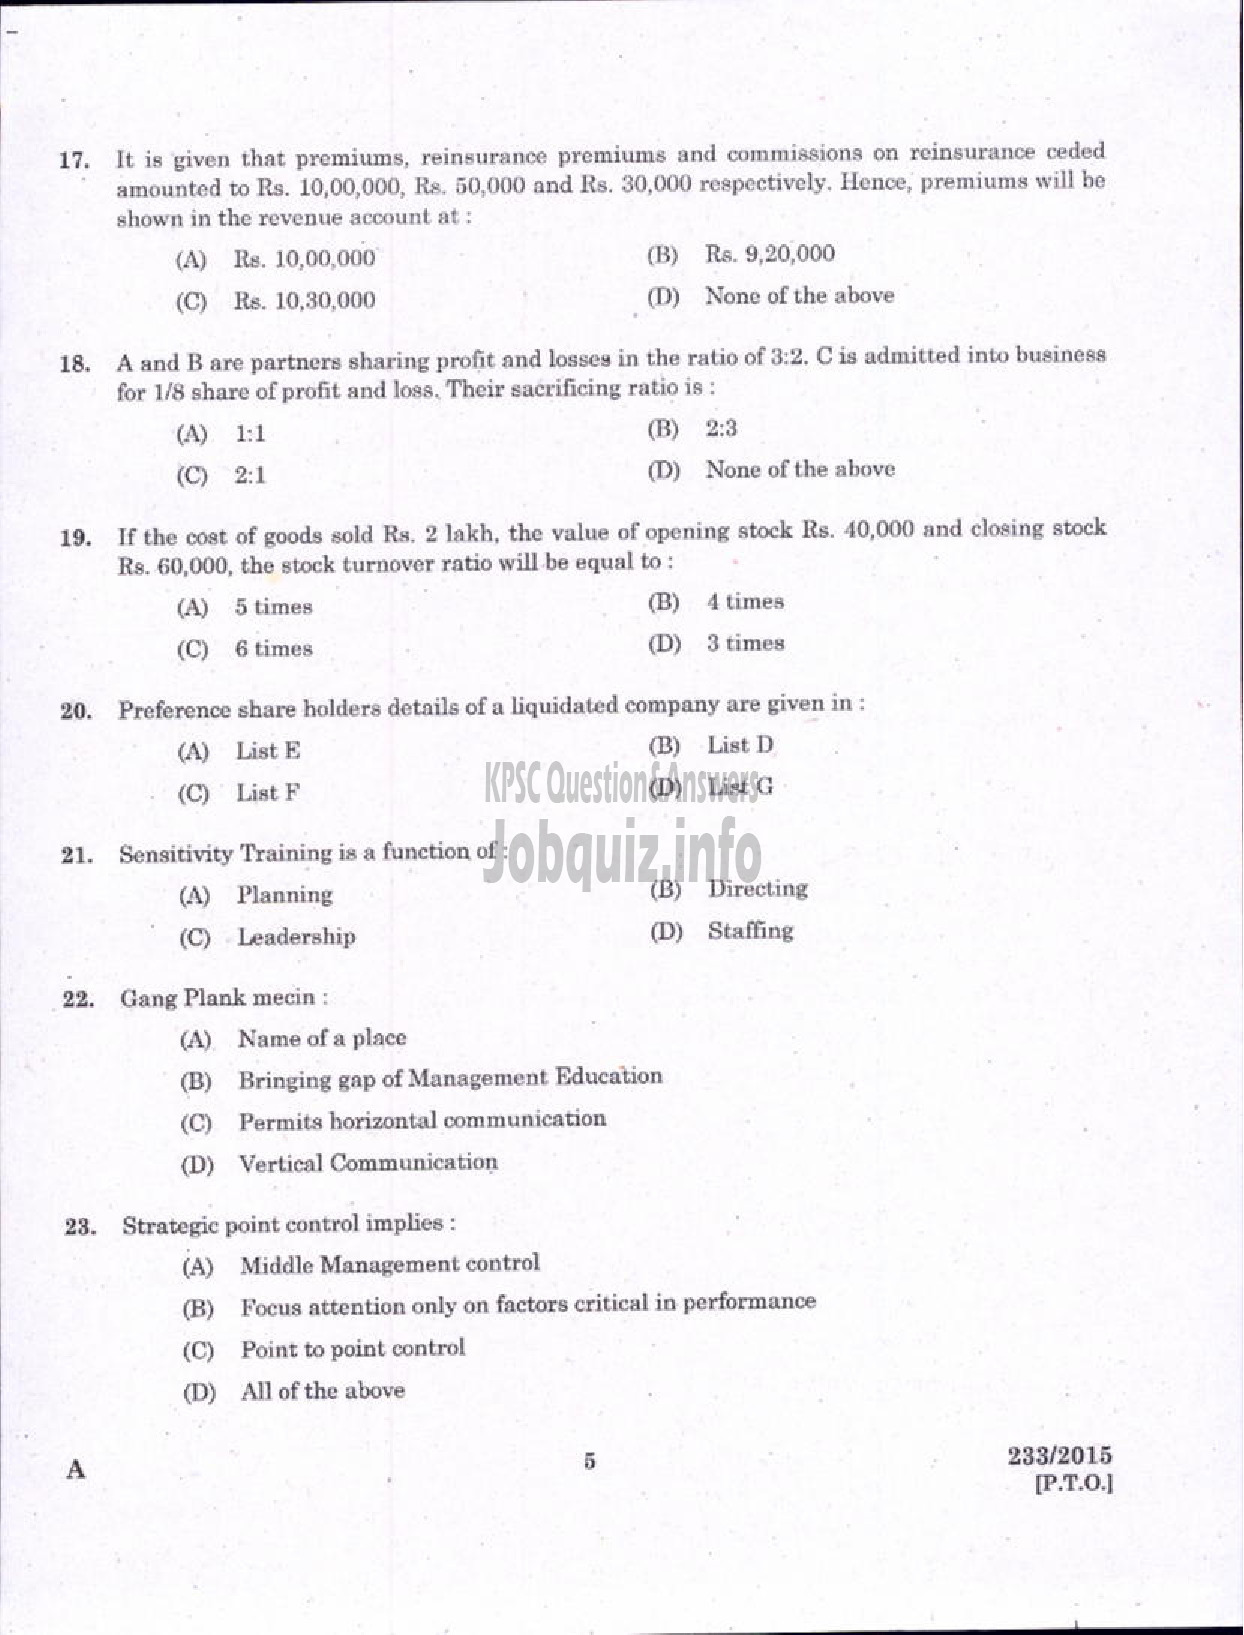 Kerala PSC Question Paper - LECTURER IN COMMERCE TECHNICAL EDUCATION-3